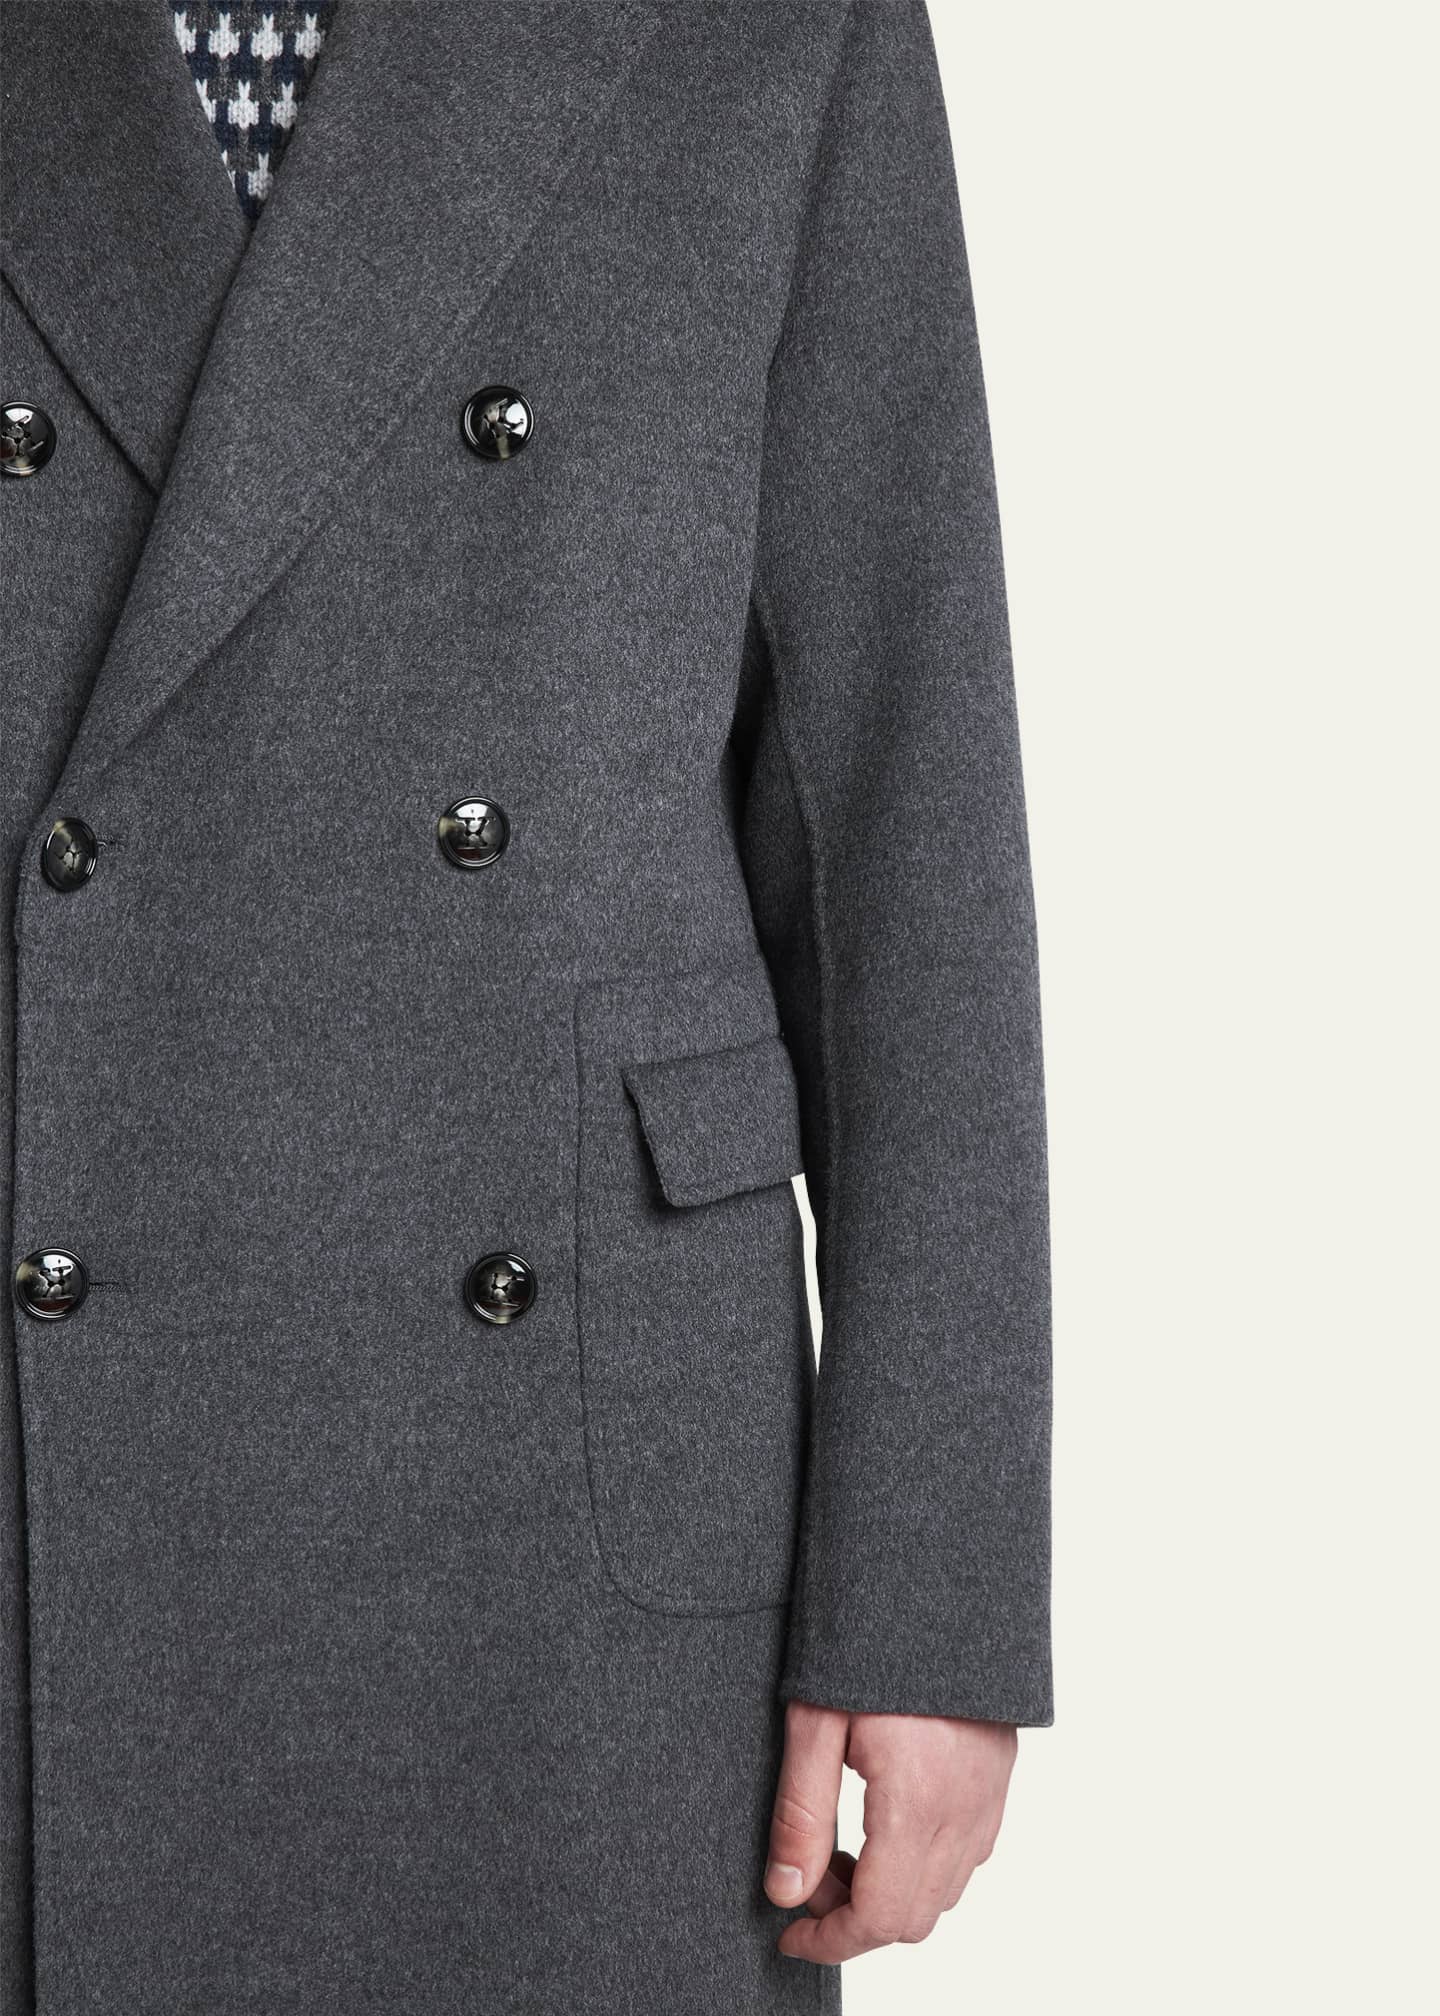 Kiton Men's Cashmere-Wool Double-Breasted Overcoat - Bergdorf Goodman